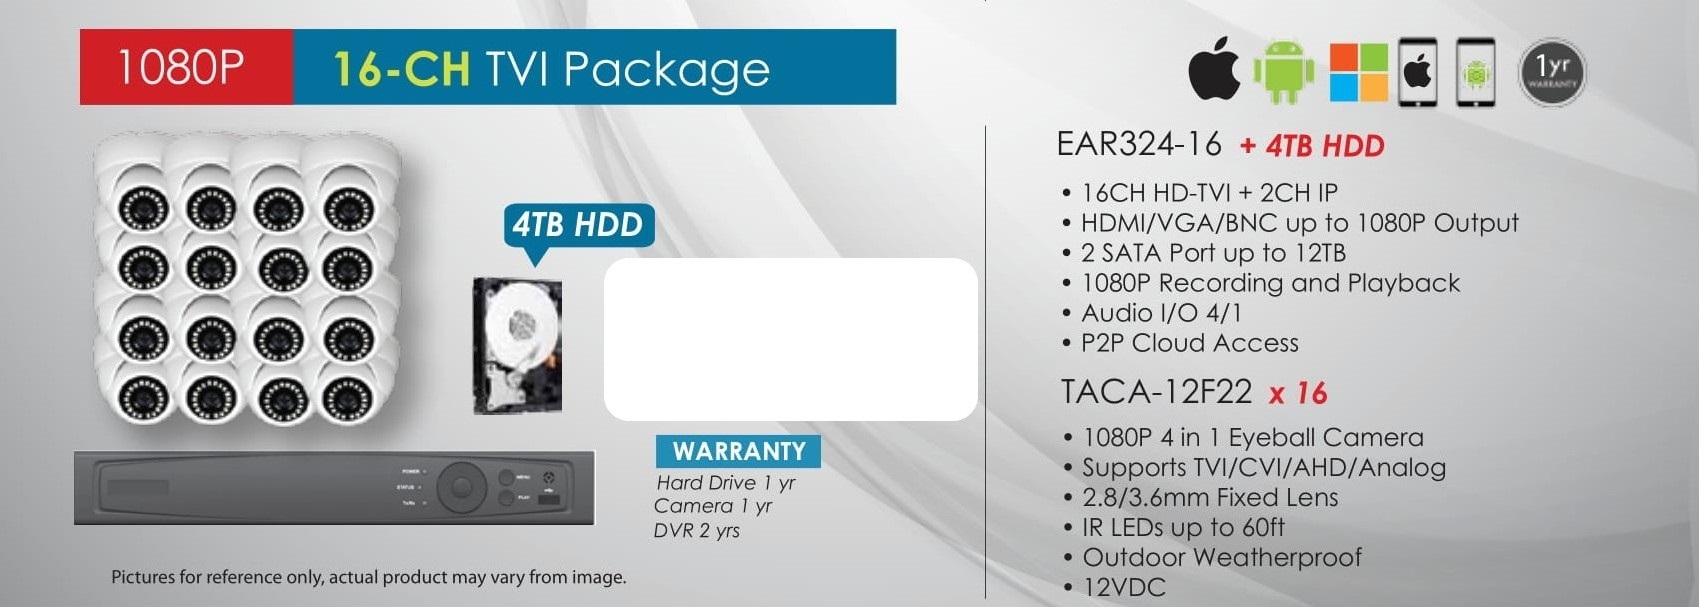 1080p-16ch-pack-1 New Packages - No Price